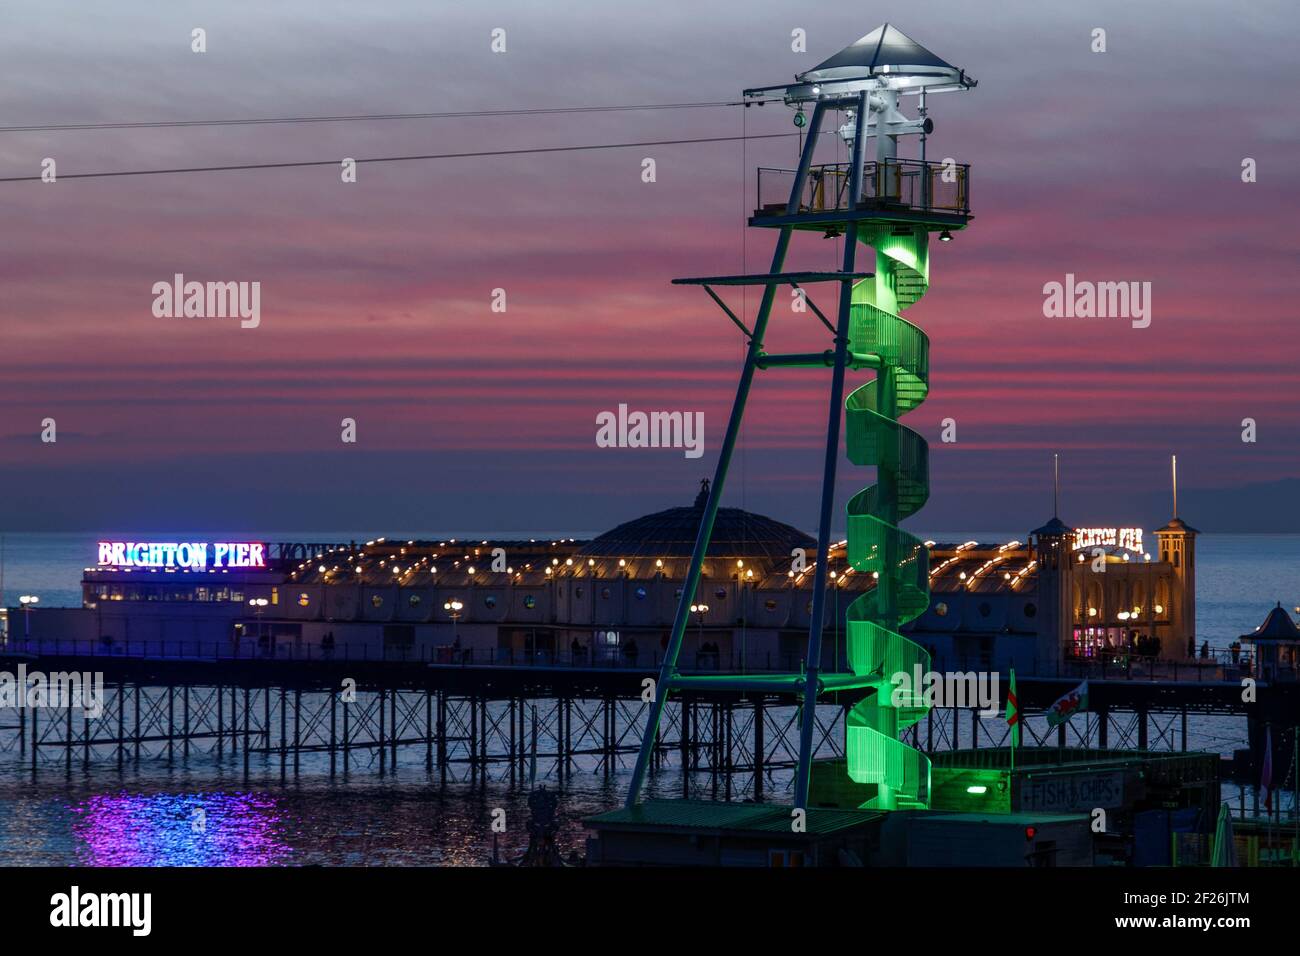 BRIGHTON, EAST SUSSEX/UK - JANUARY 26 : View of  the Zip Wire next to the Pier in Brighton East Sussex on January 26, 2018. Unid Stock Photo